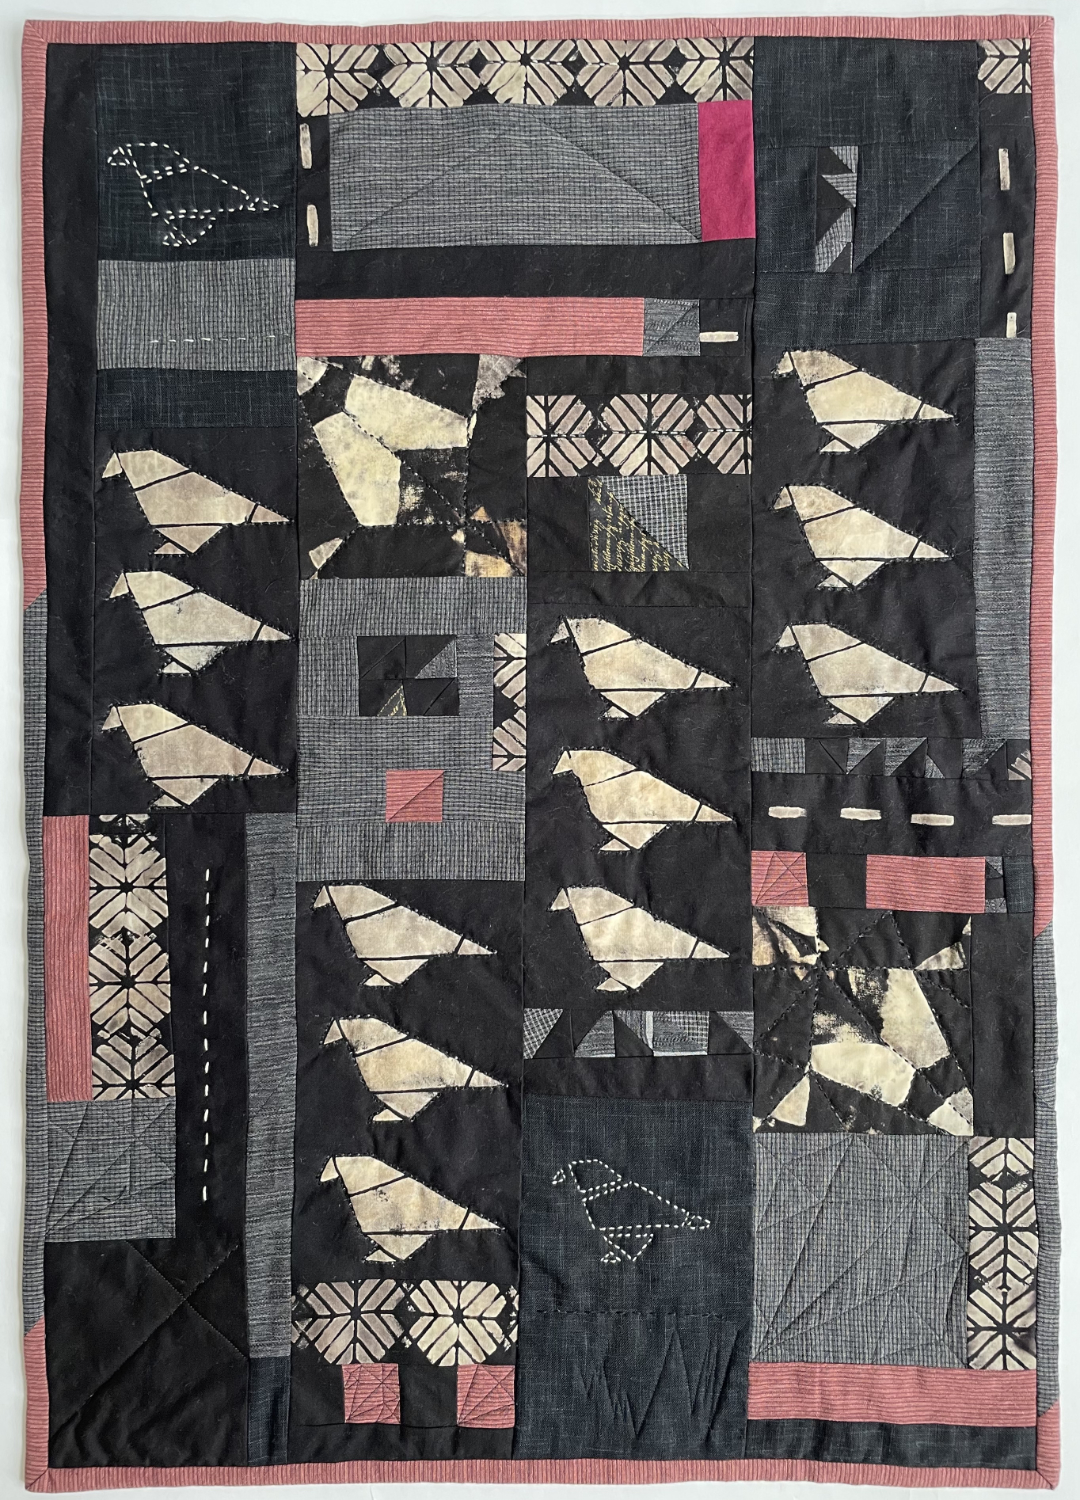 quilt with stitched and stenciled origami bird shapes